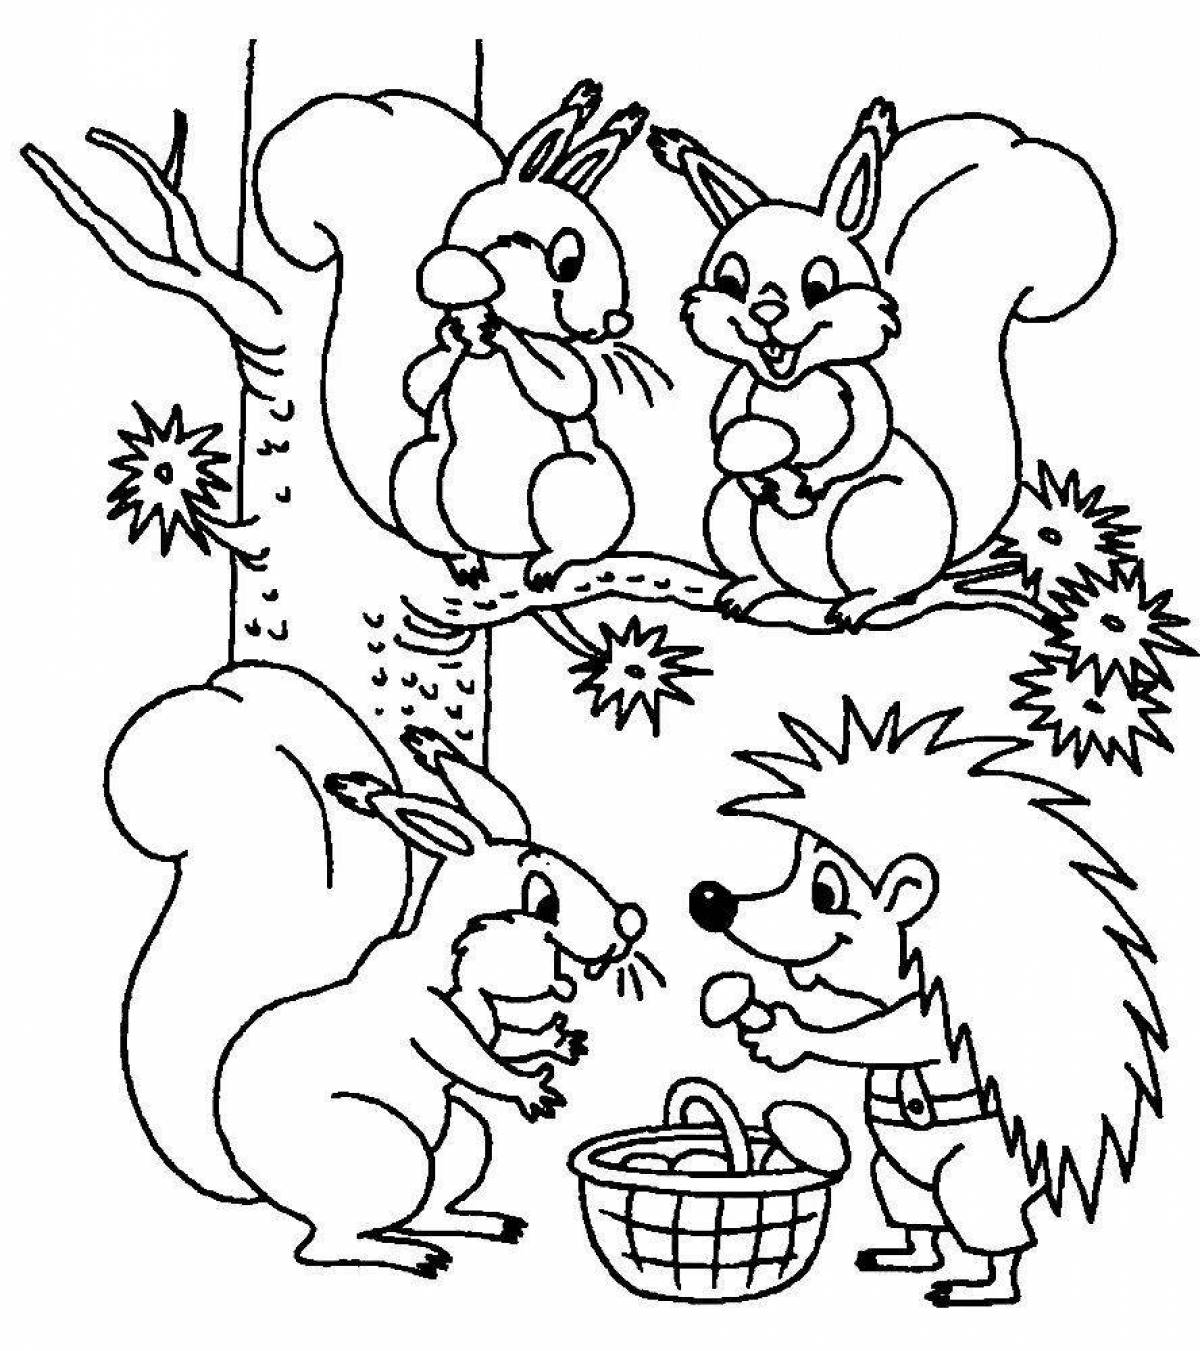 Cute forest animal coloring book for 3-4 year olds